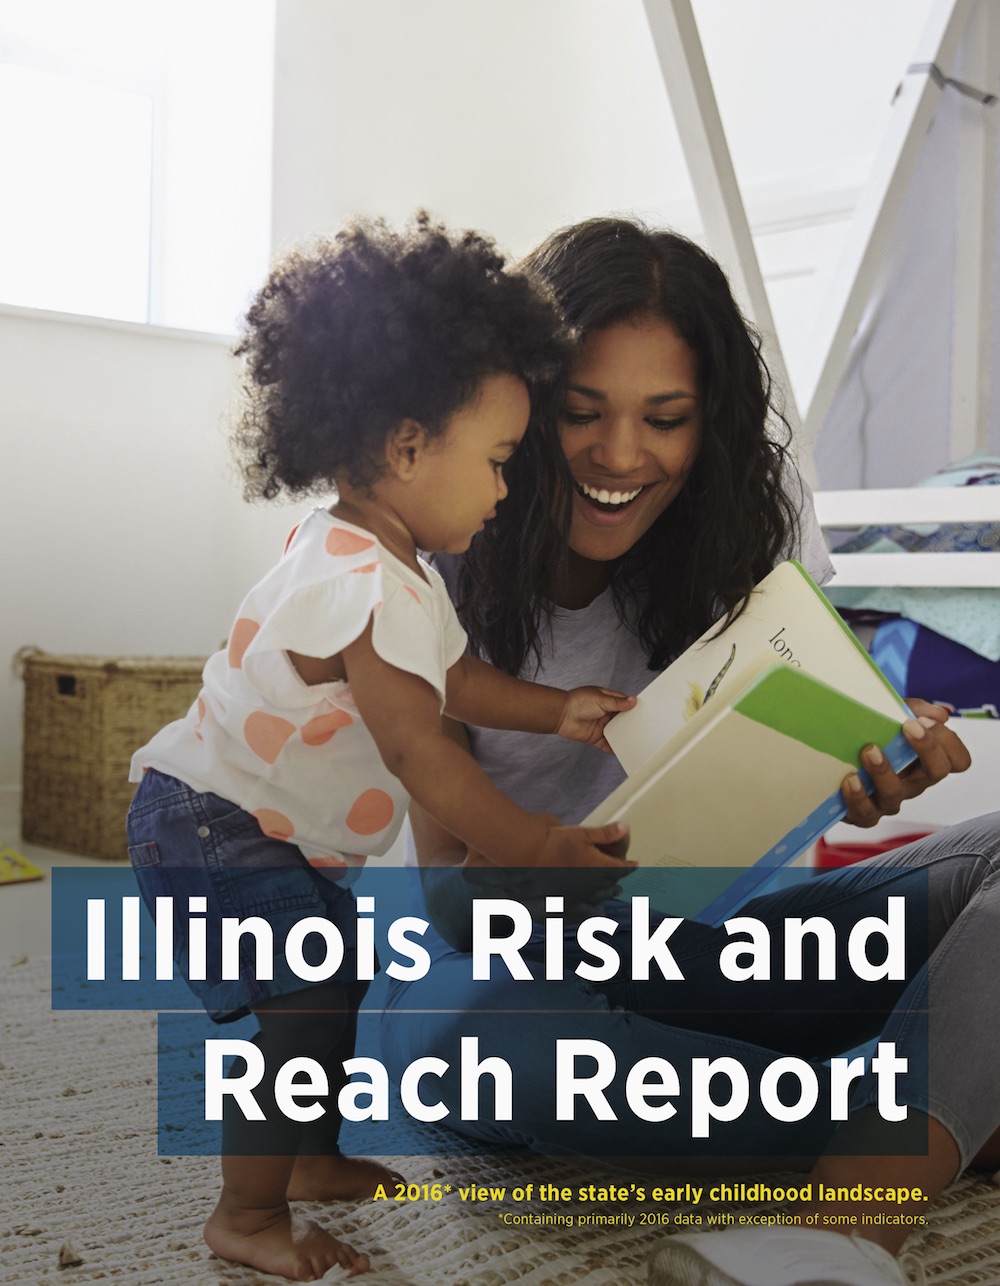 Risk and Reach Report, 2016 Data